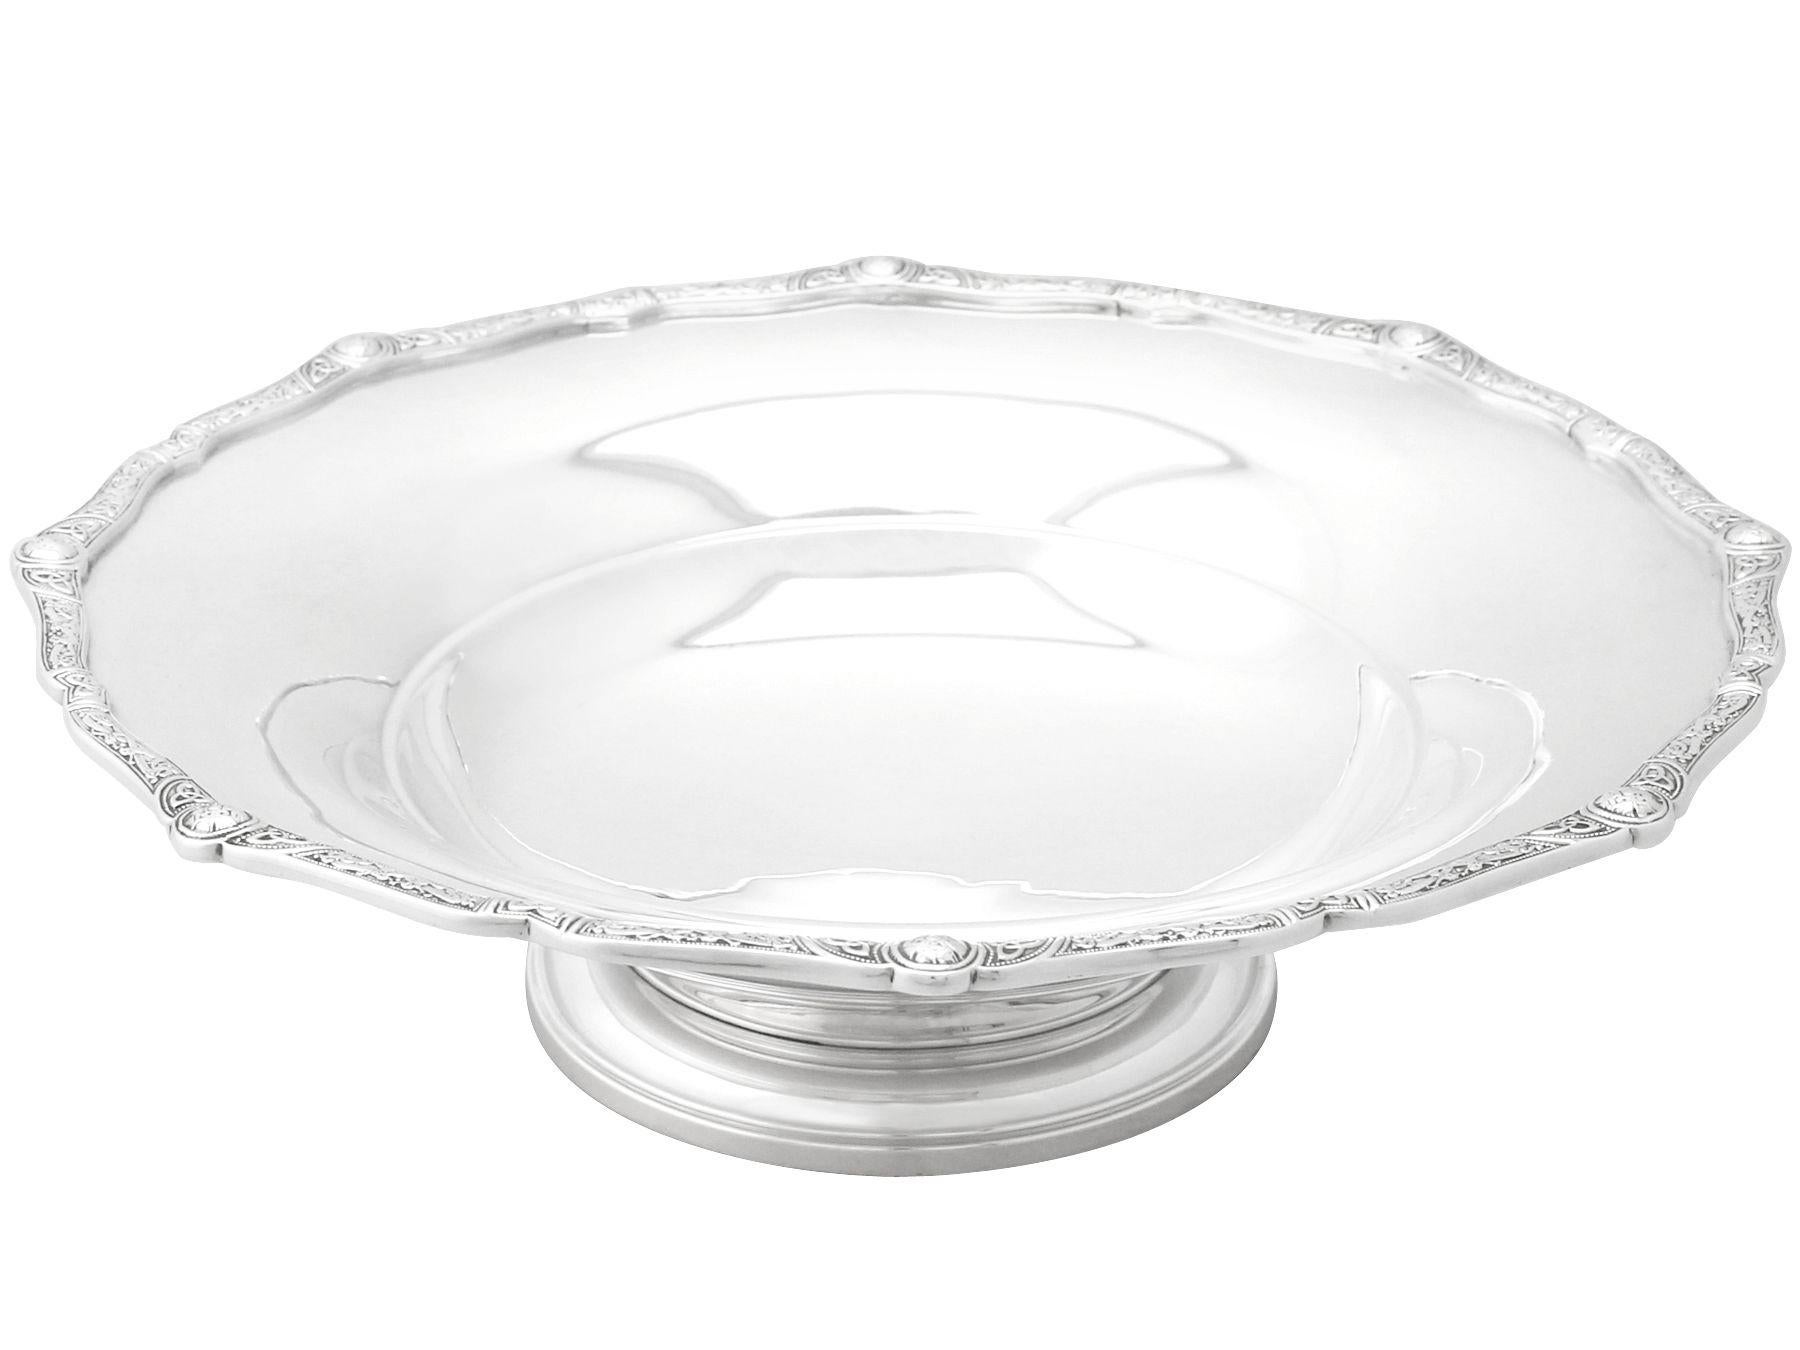 An exceptional, fine and impressive antique George V English sterling silver dish or tazza in the Lindisfarne style; an addition to our ornamental silverware collection.

This exceptional antique George V sterling silver dish or tazza has a